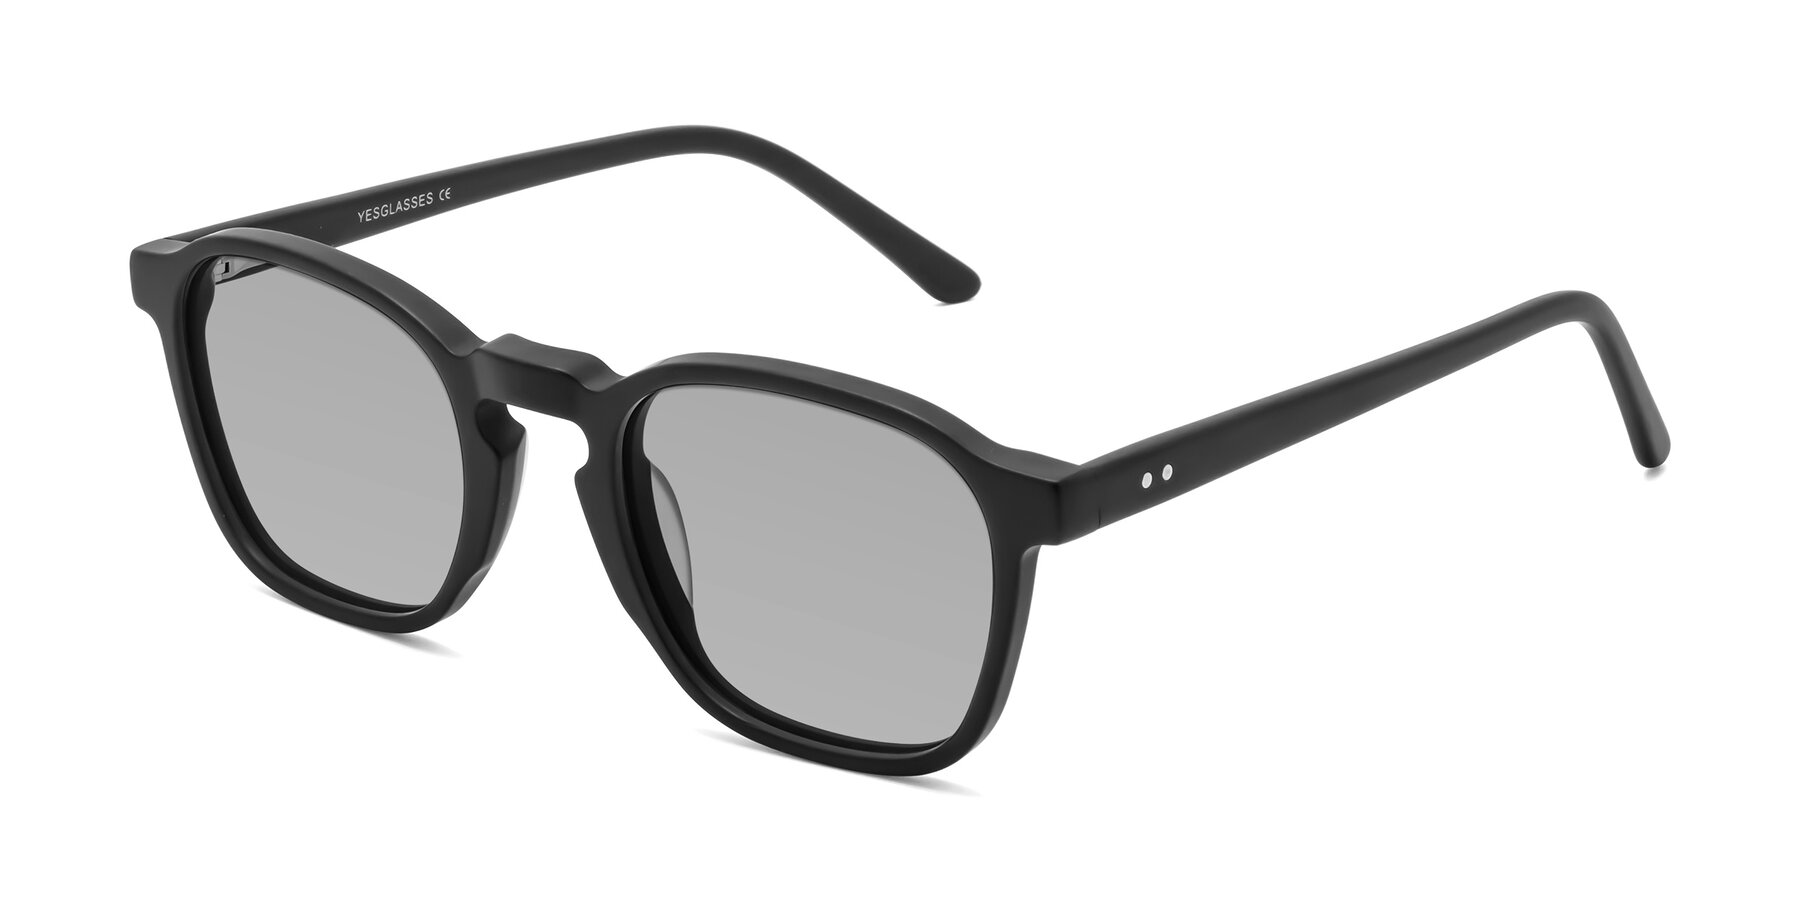 Angle of Generous in Matte Black with Light Gray Tinted Lenses